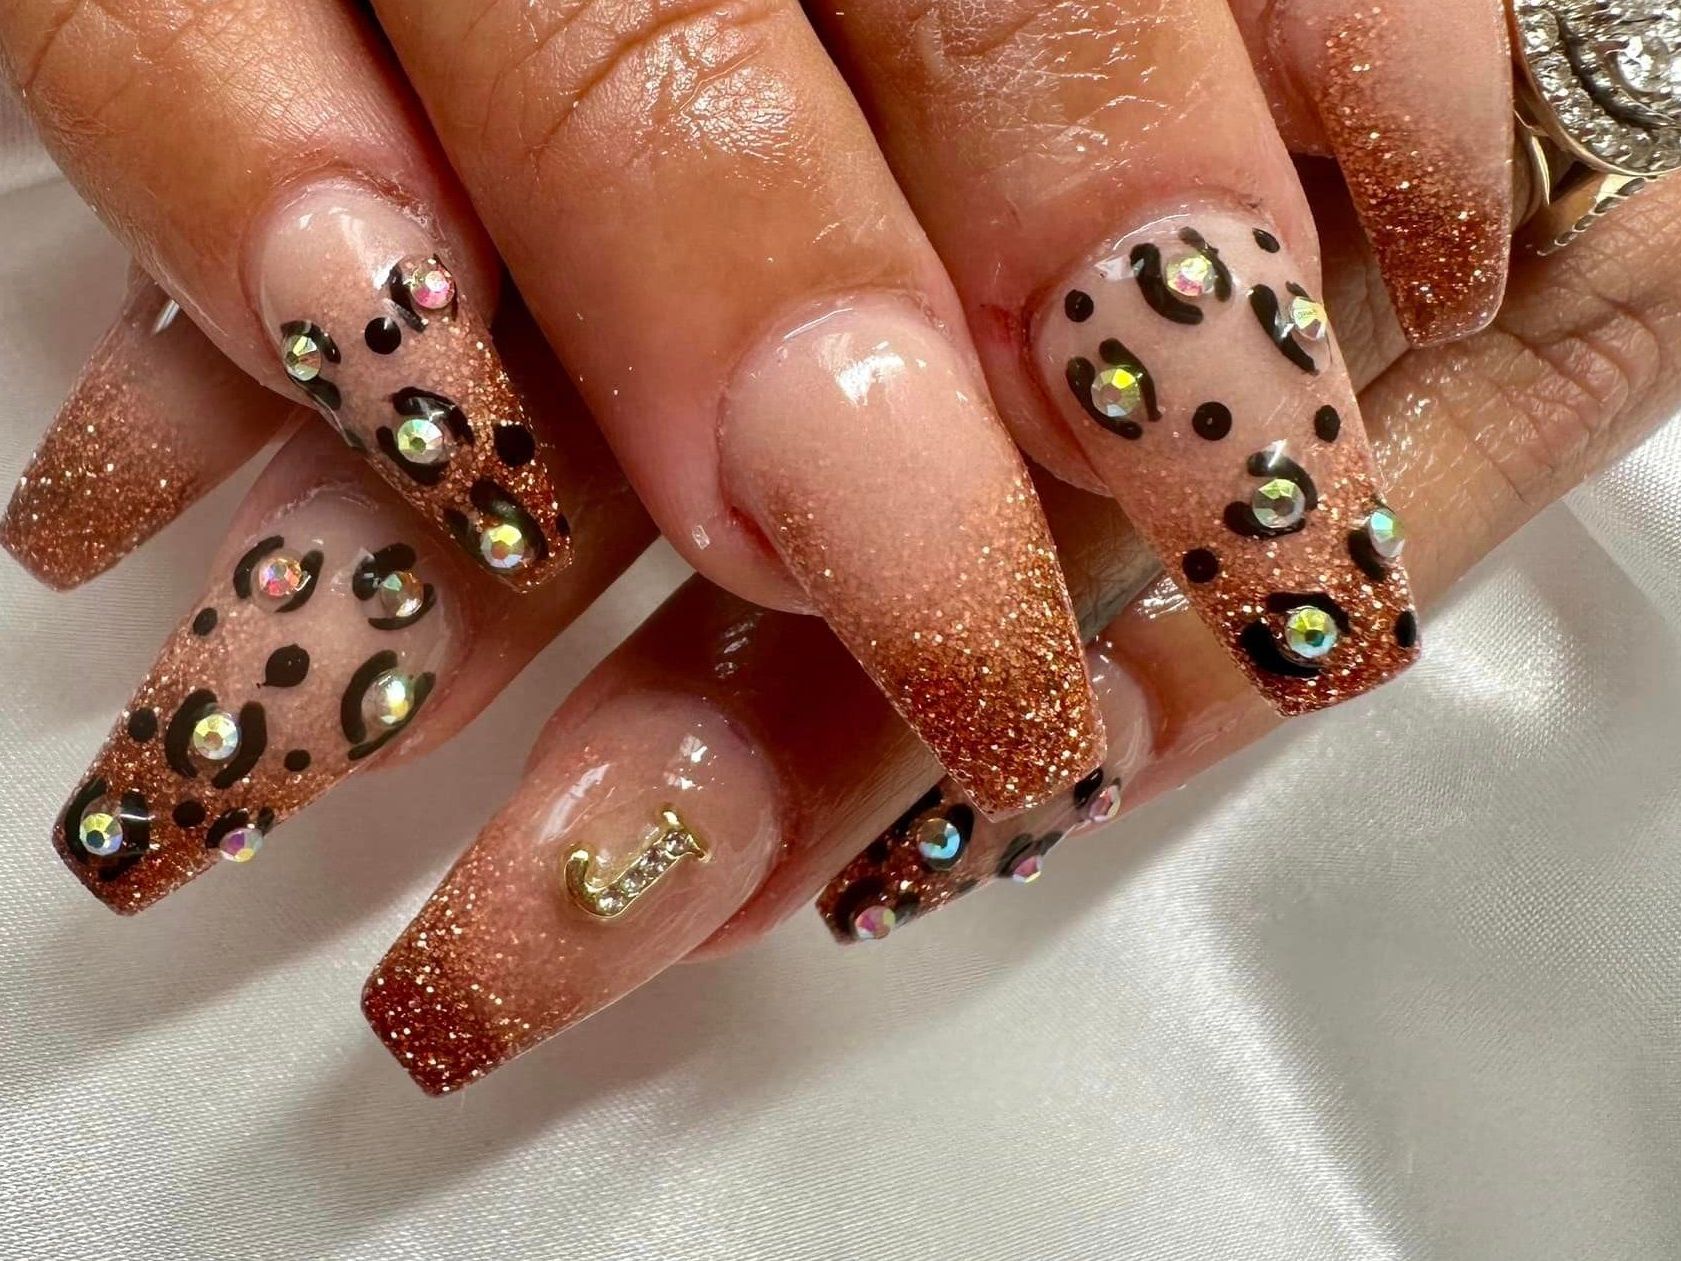 A close up of a woman 's nails with a leopard print and rhinestones.